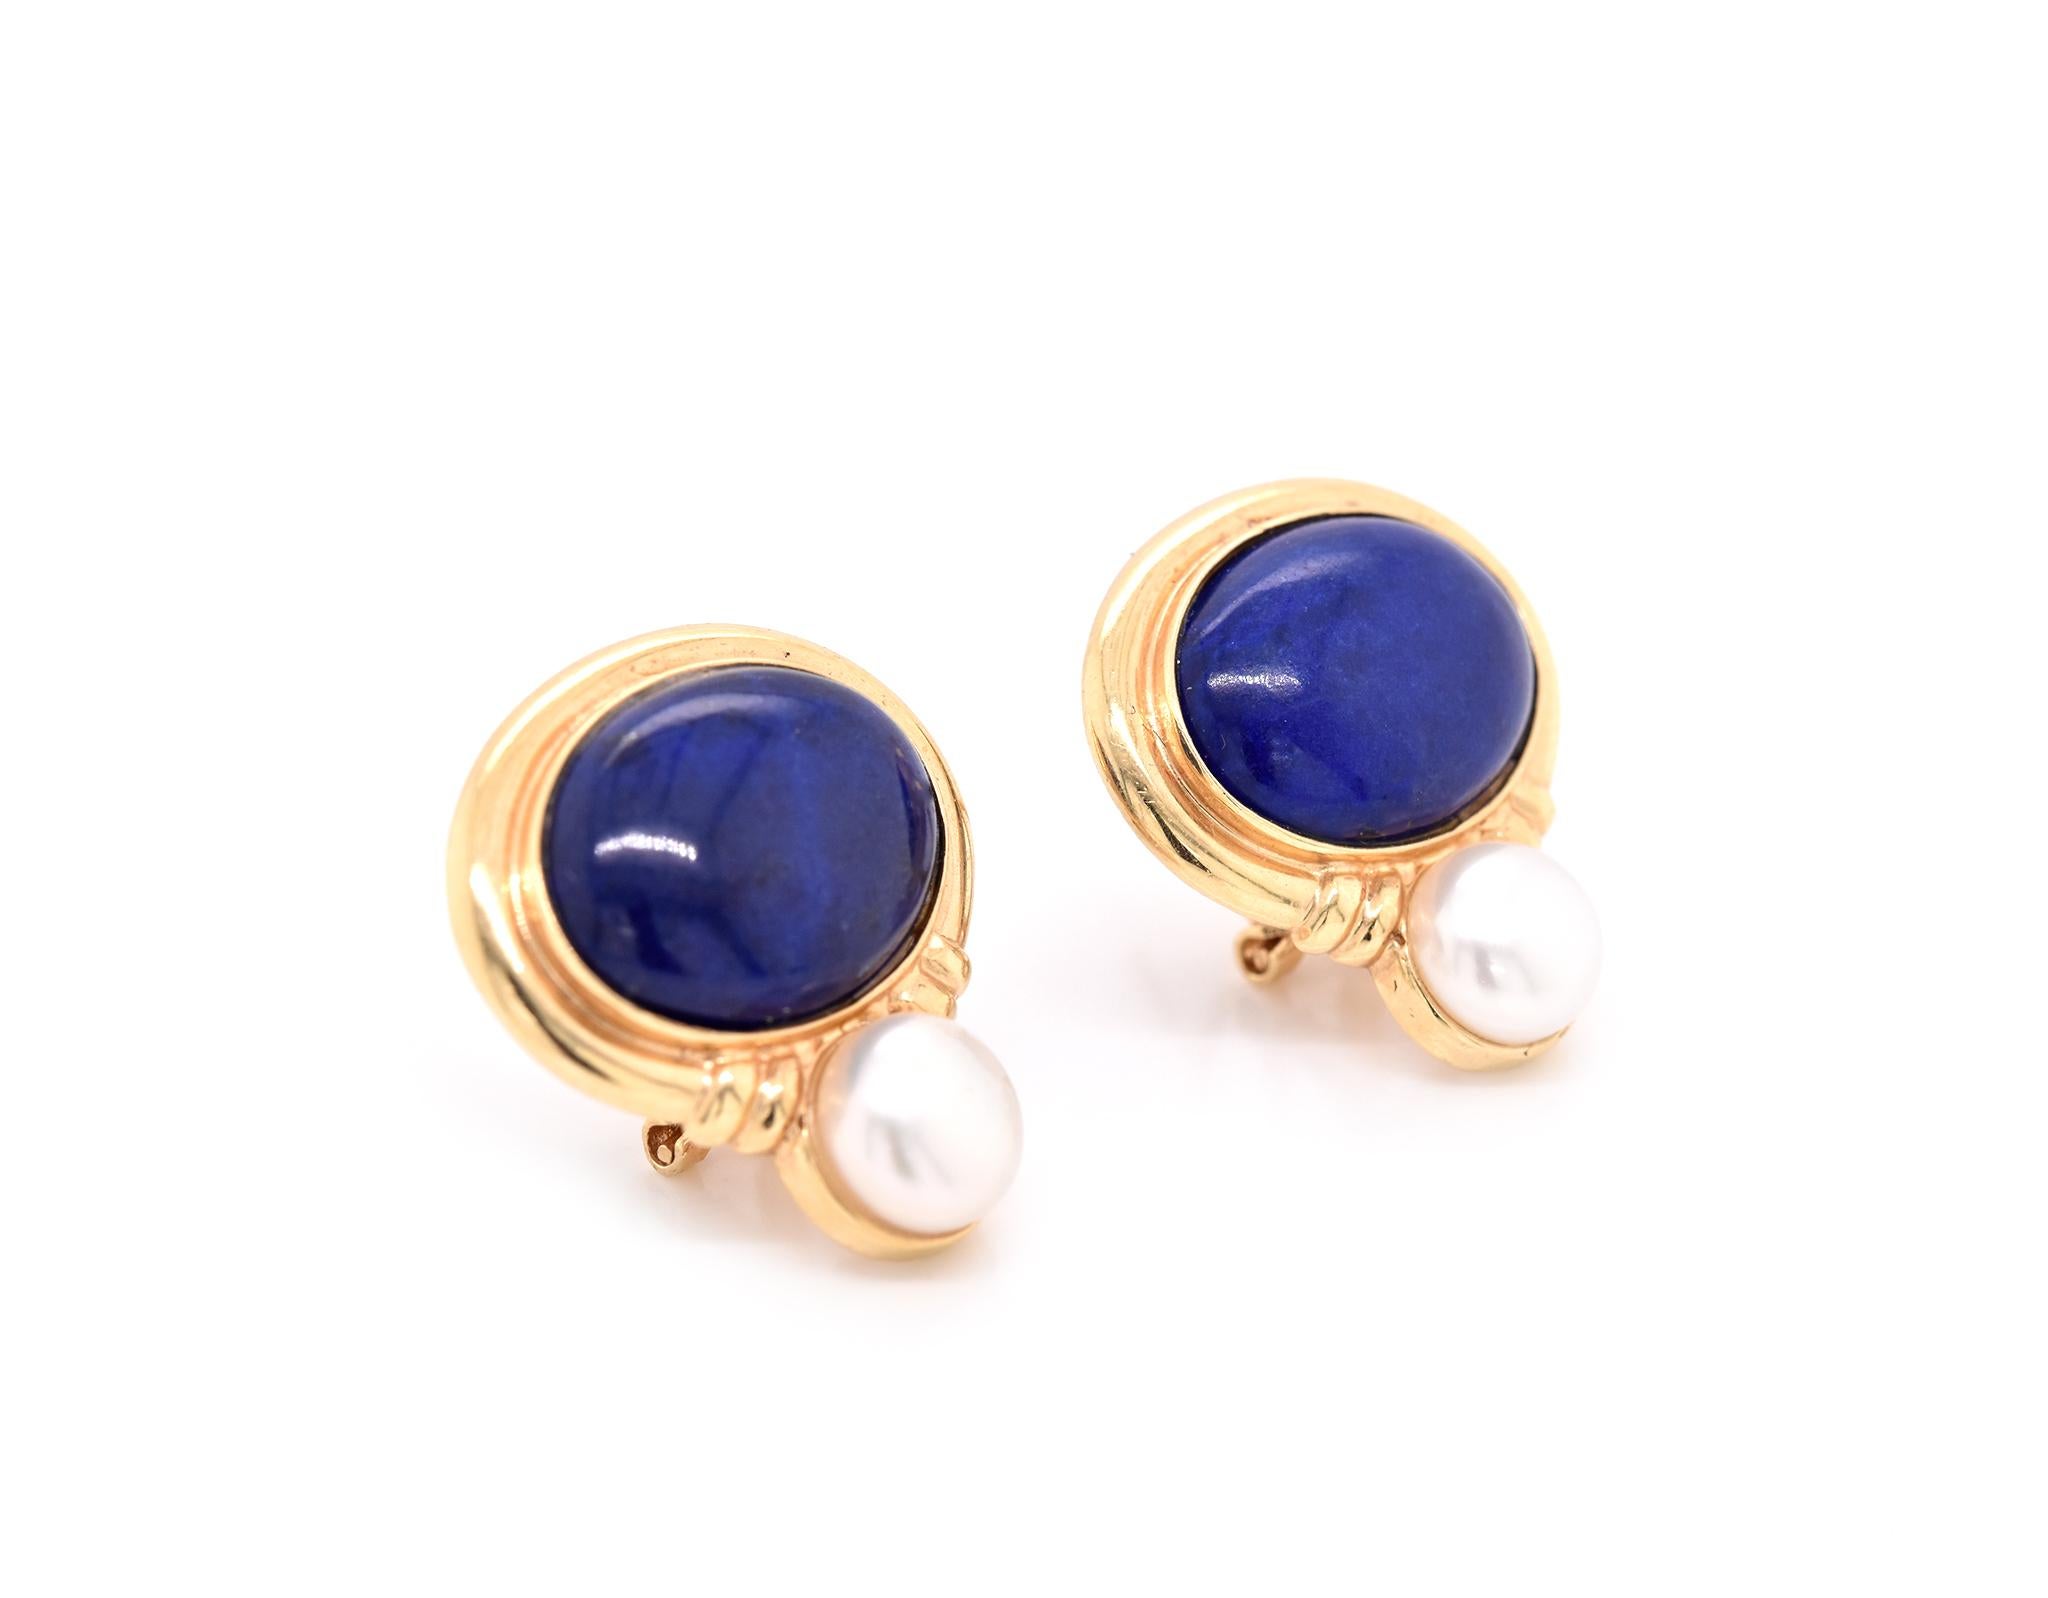 Material: 14k yellow gold
Gemstone: Lapis Lazuli and Button Pearls
Dimensions: earrings measure 22.80mm x 21mm
Fastenings: post with omega back
Weight: 8.1 grams
